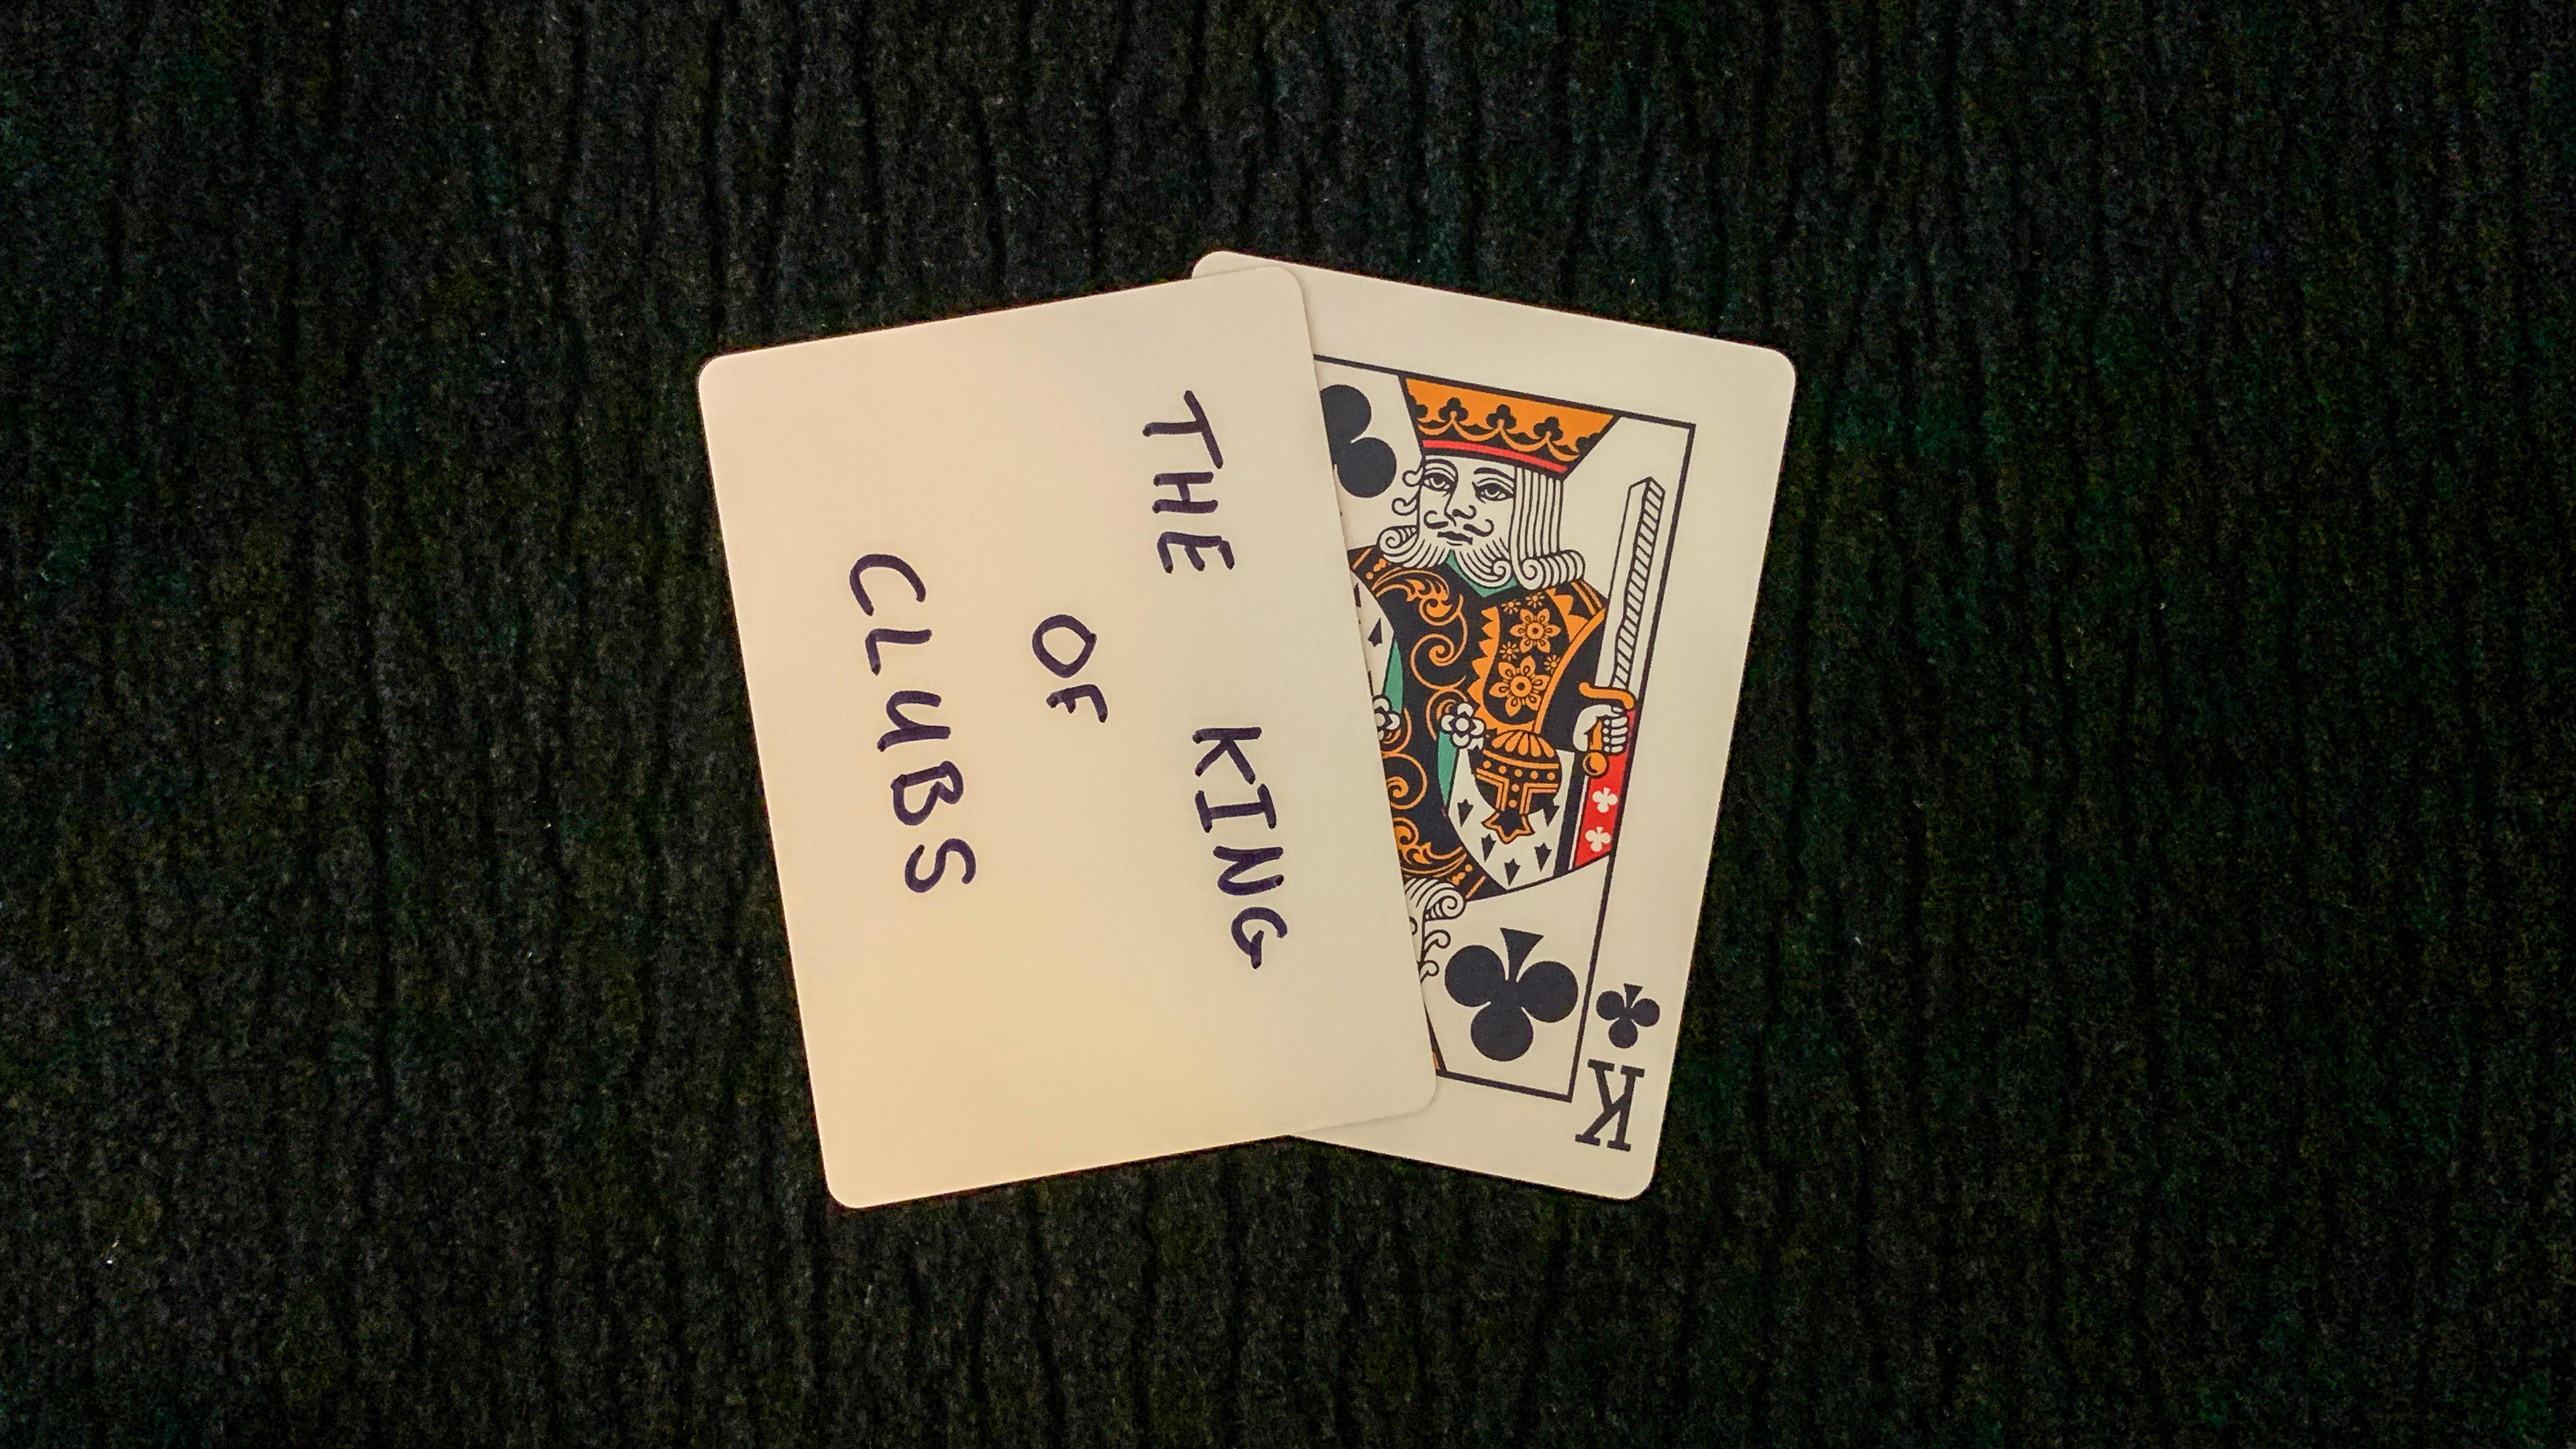 King of Clubs is written on the face of a blank playing card used in a card trick